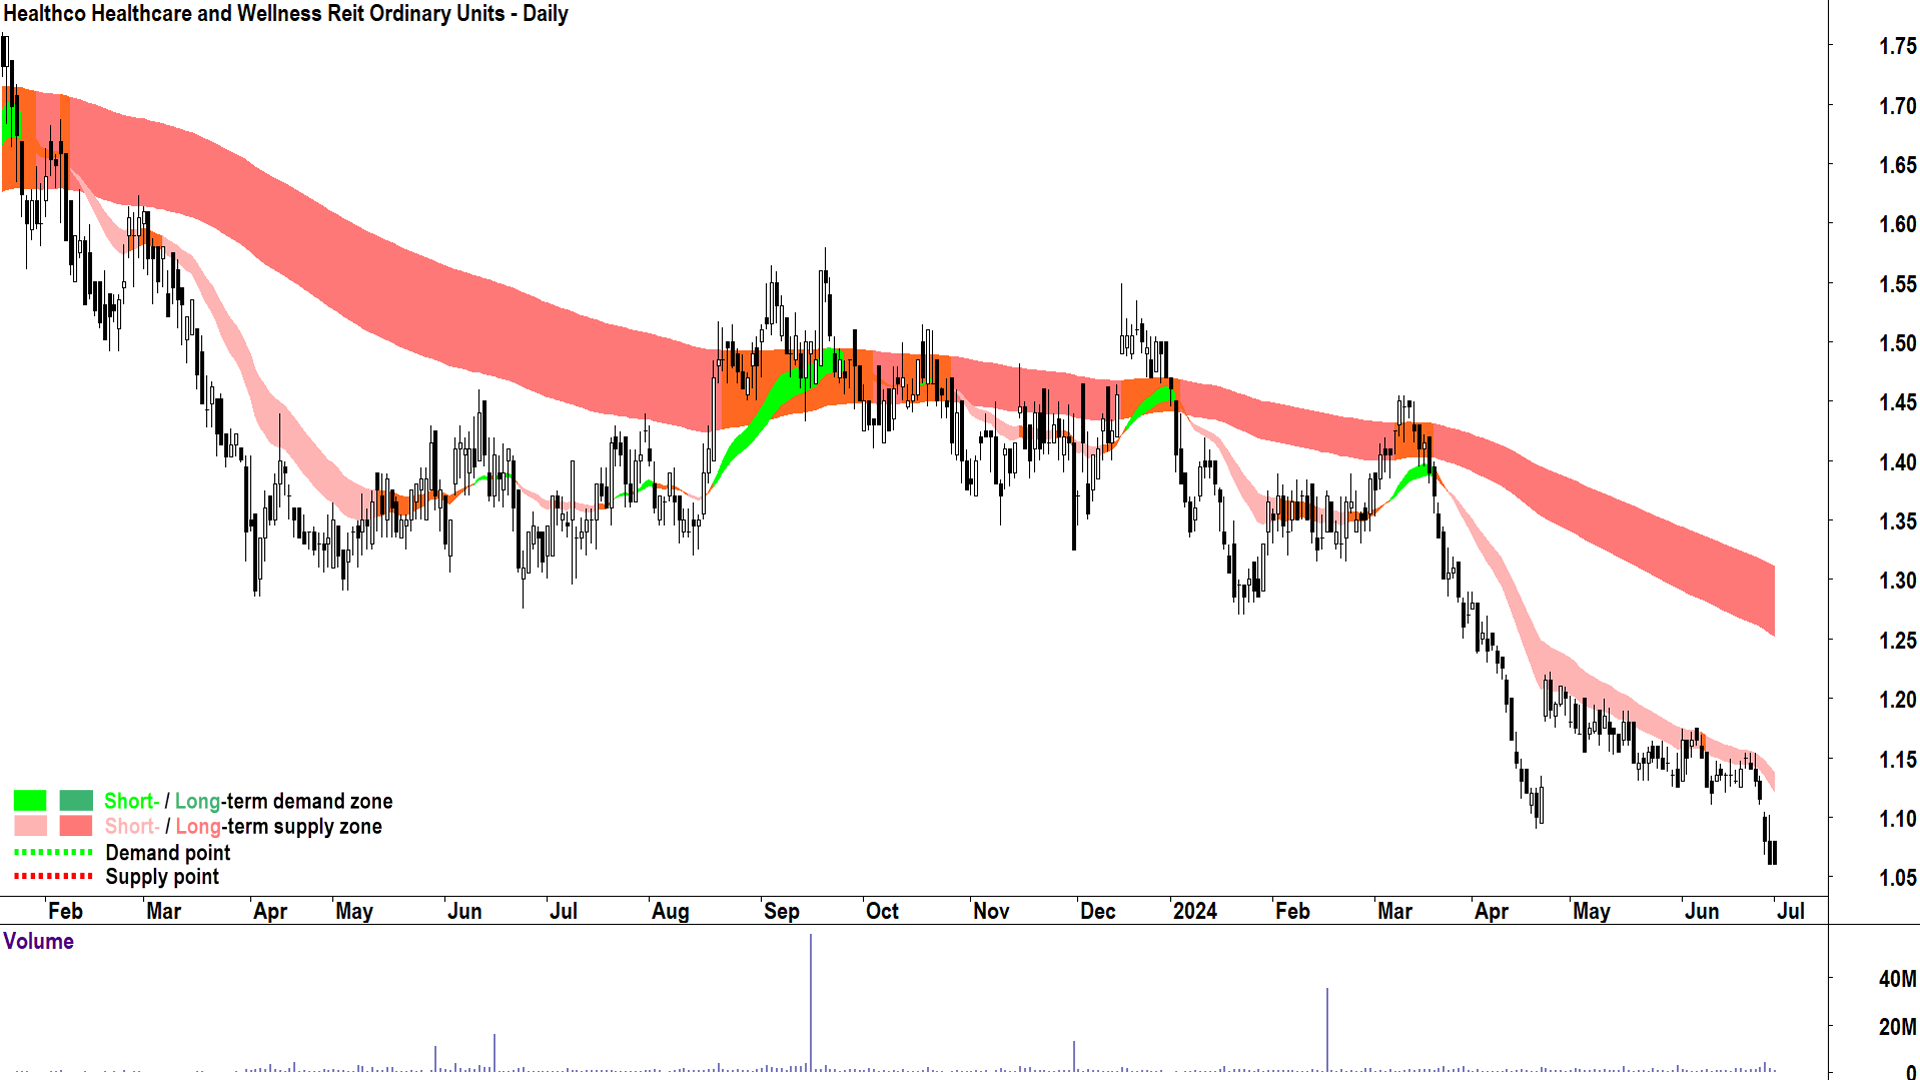 Healthco Healthcare and Wellness Reit (ASX-HCW) chart 1 July 2024